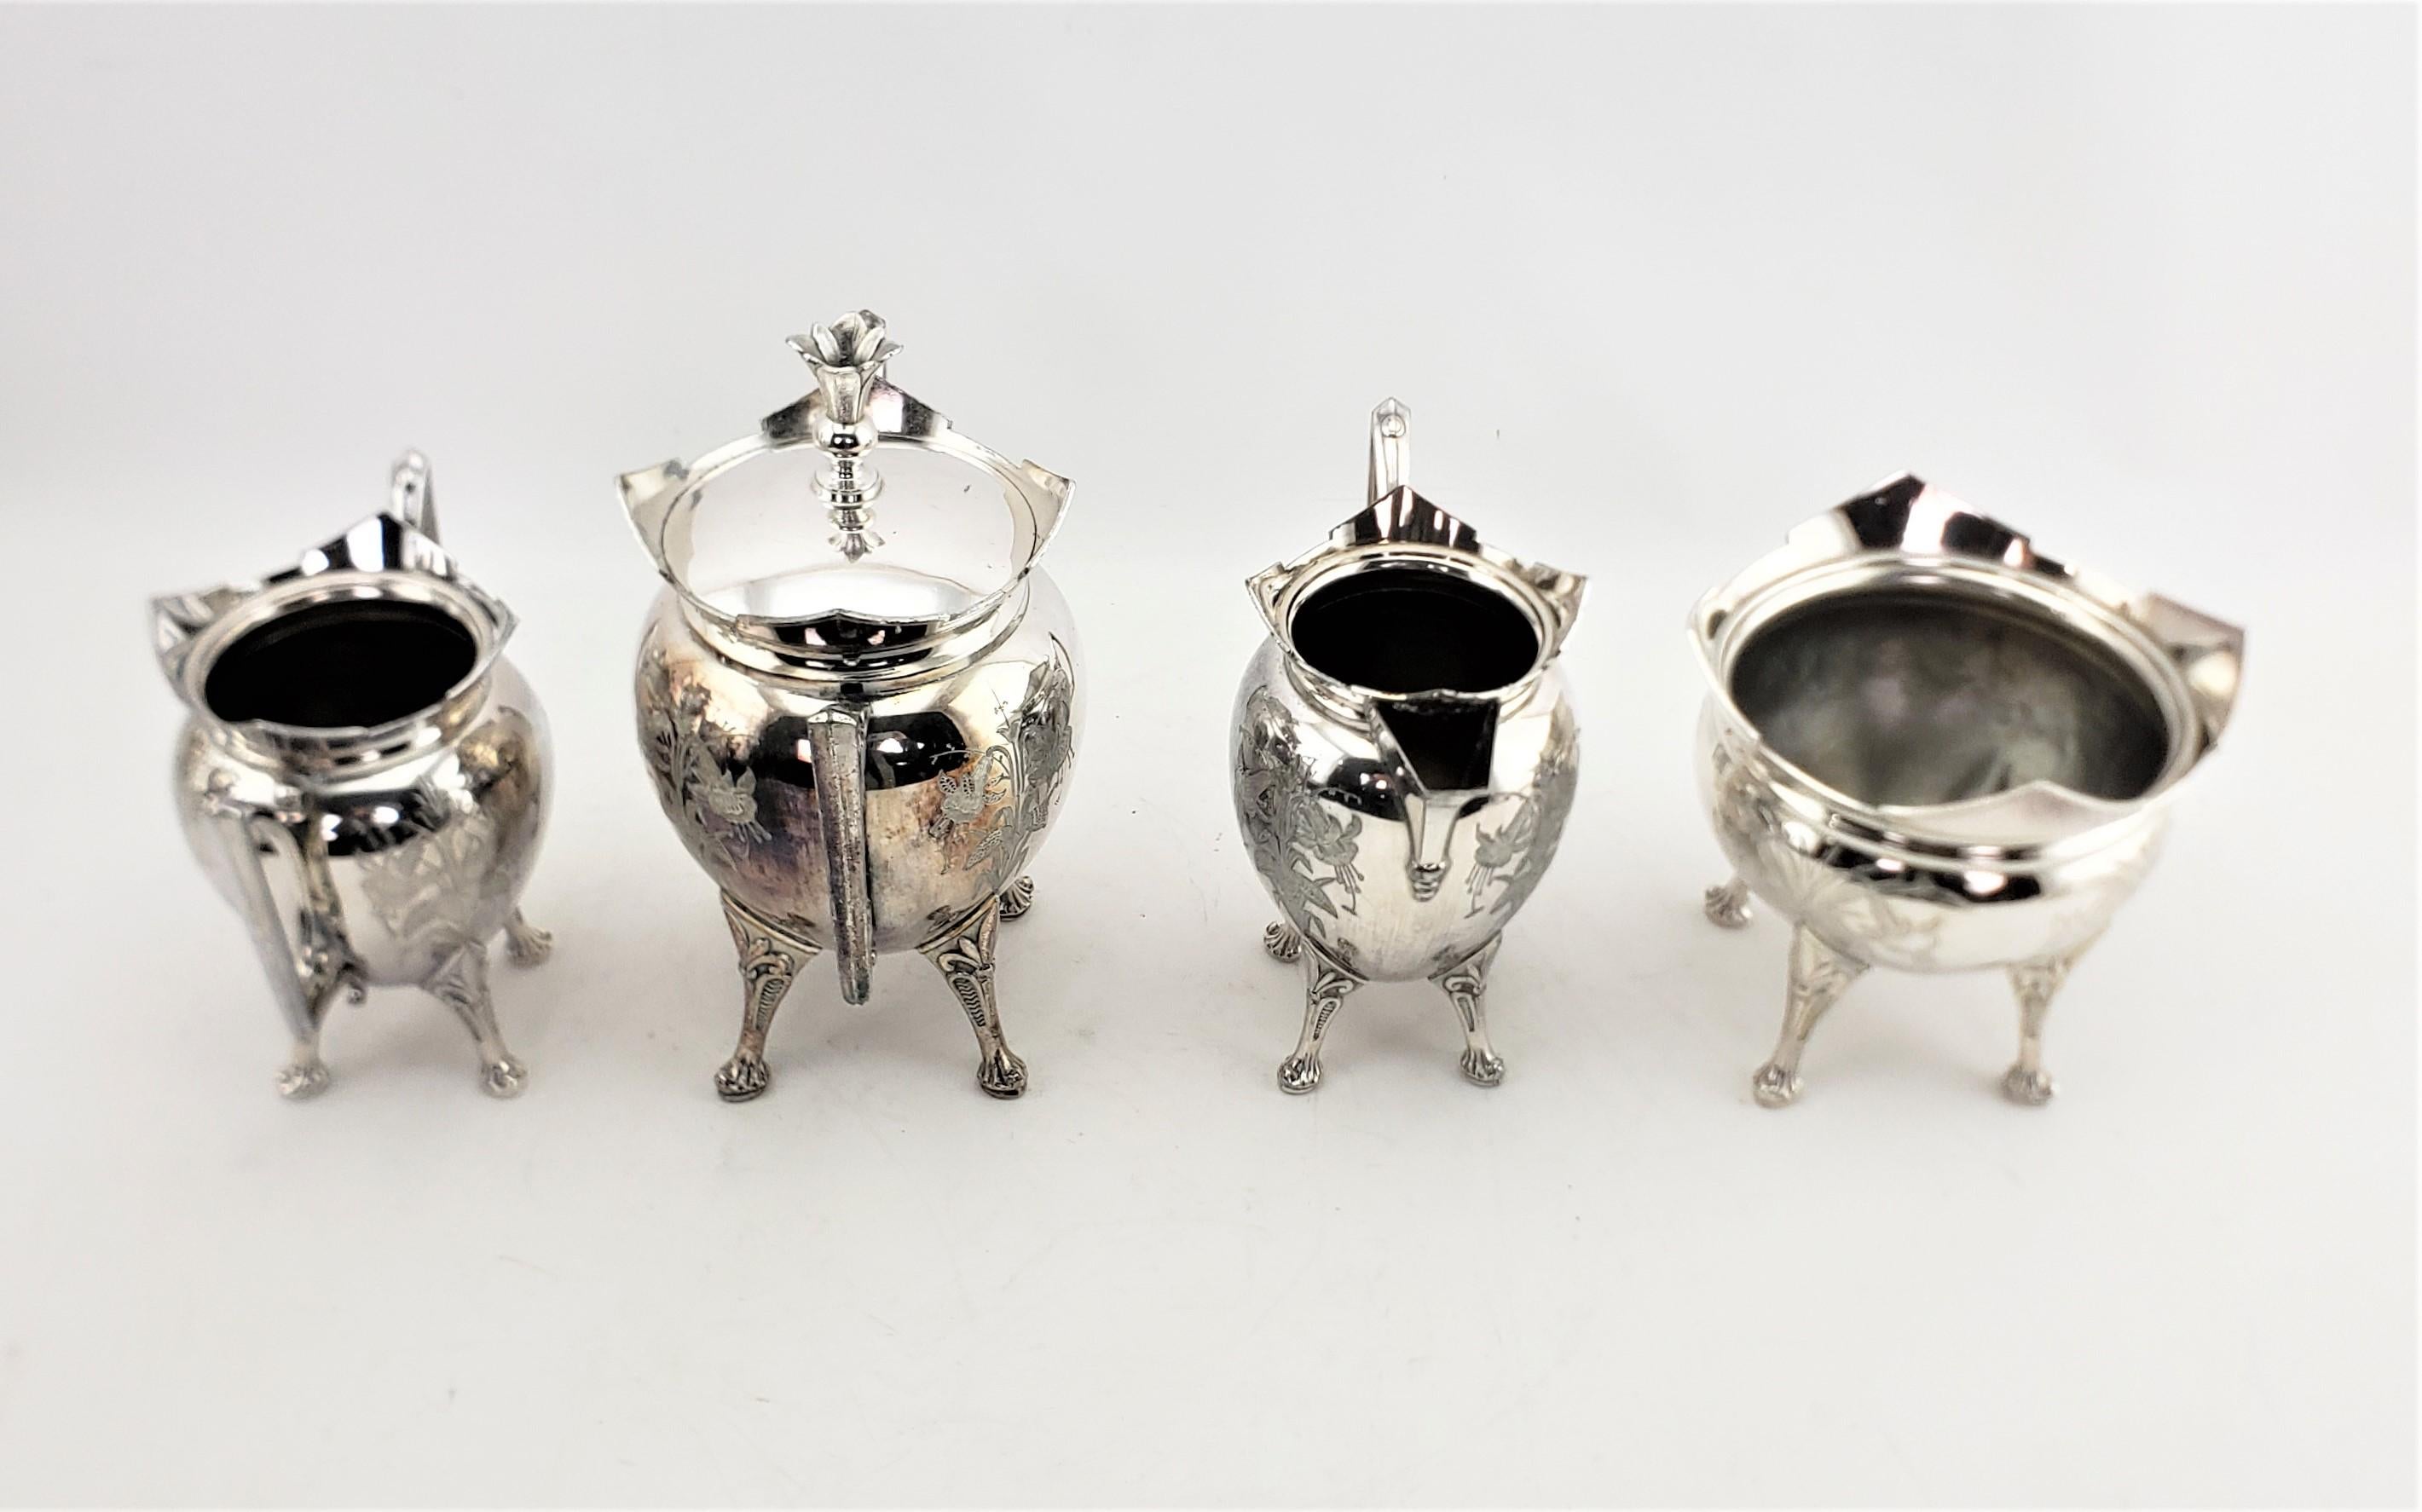 Antique Aesthetic Movement 7 Piece Silver Plated Tea Set with Floral Decoration For Sale 8